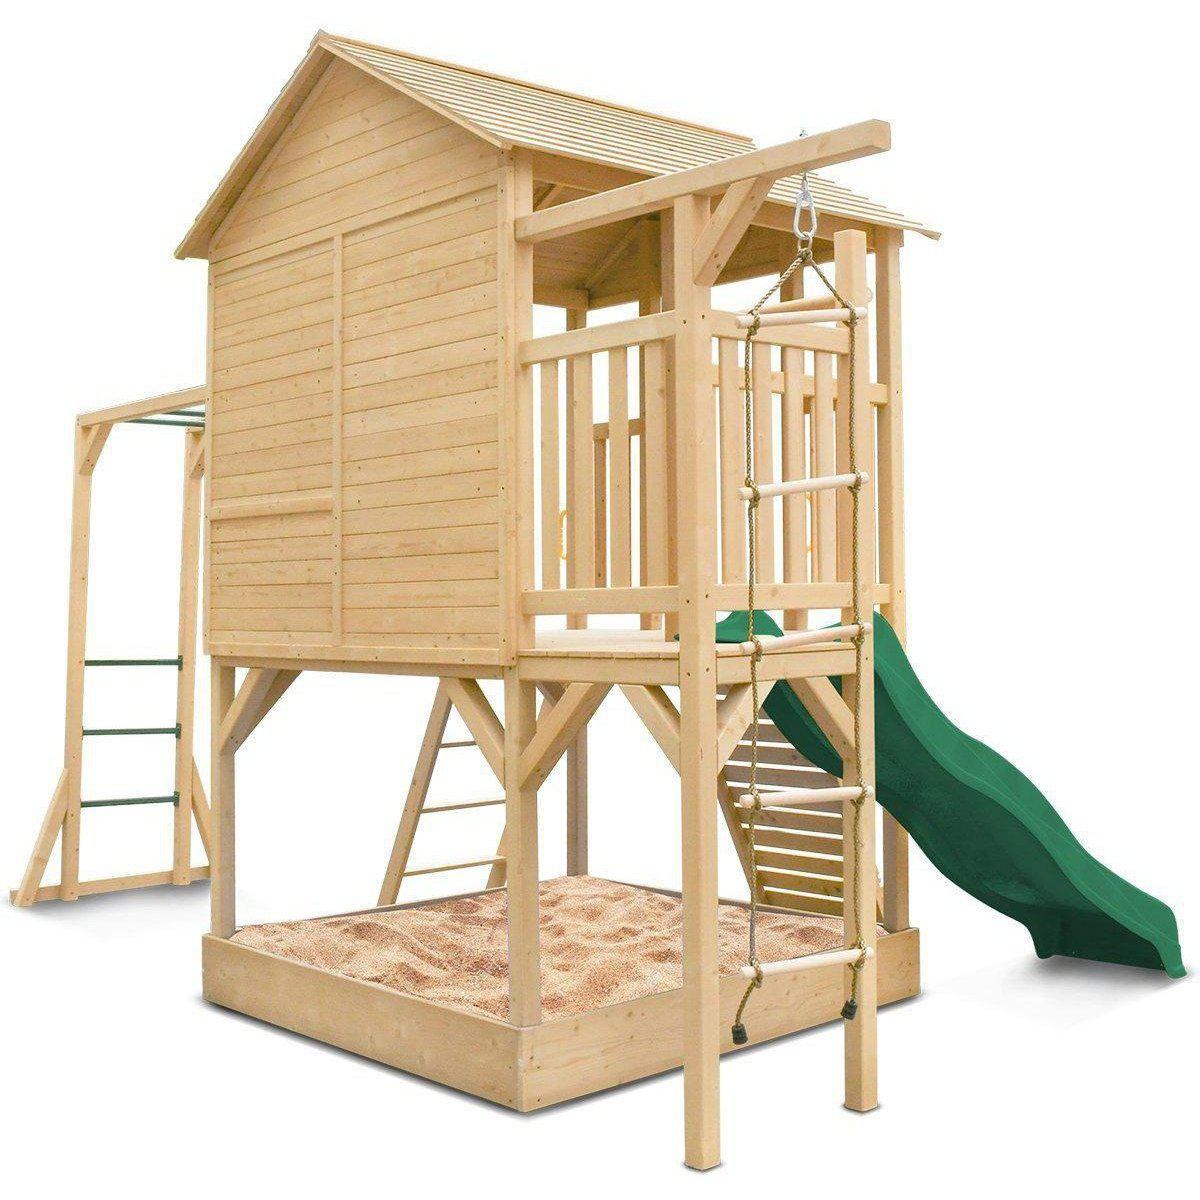 Unleash Fun: Kingston Cubby House with Green Slide - Shop Now